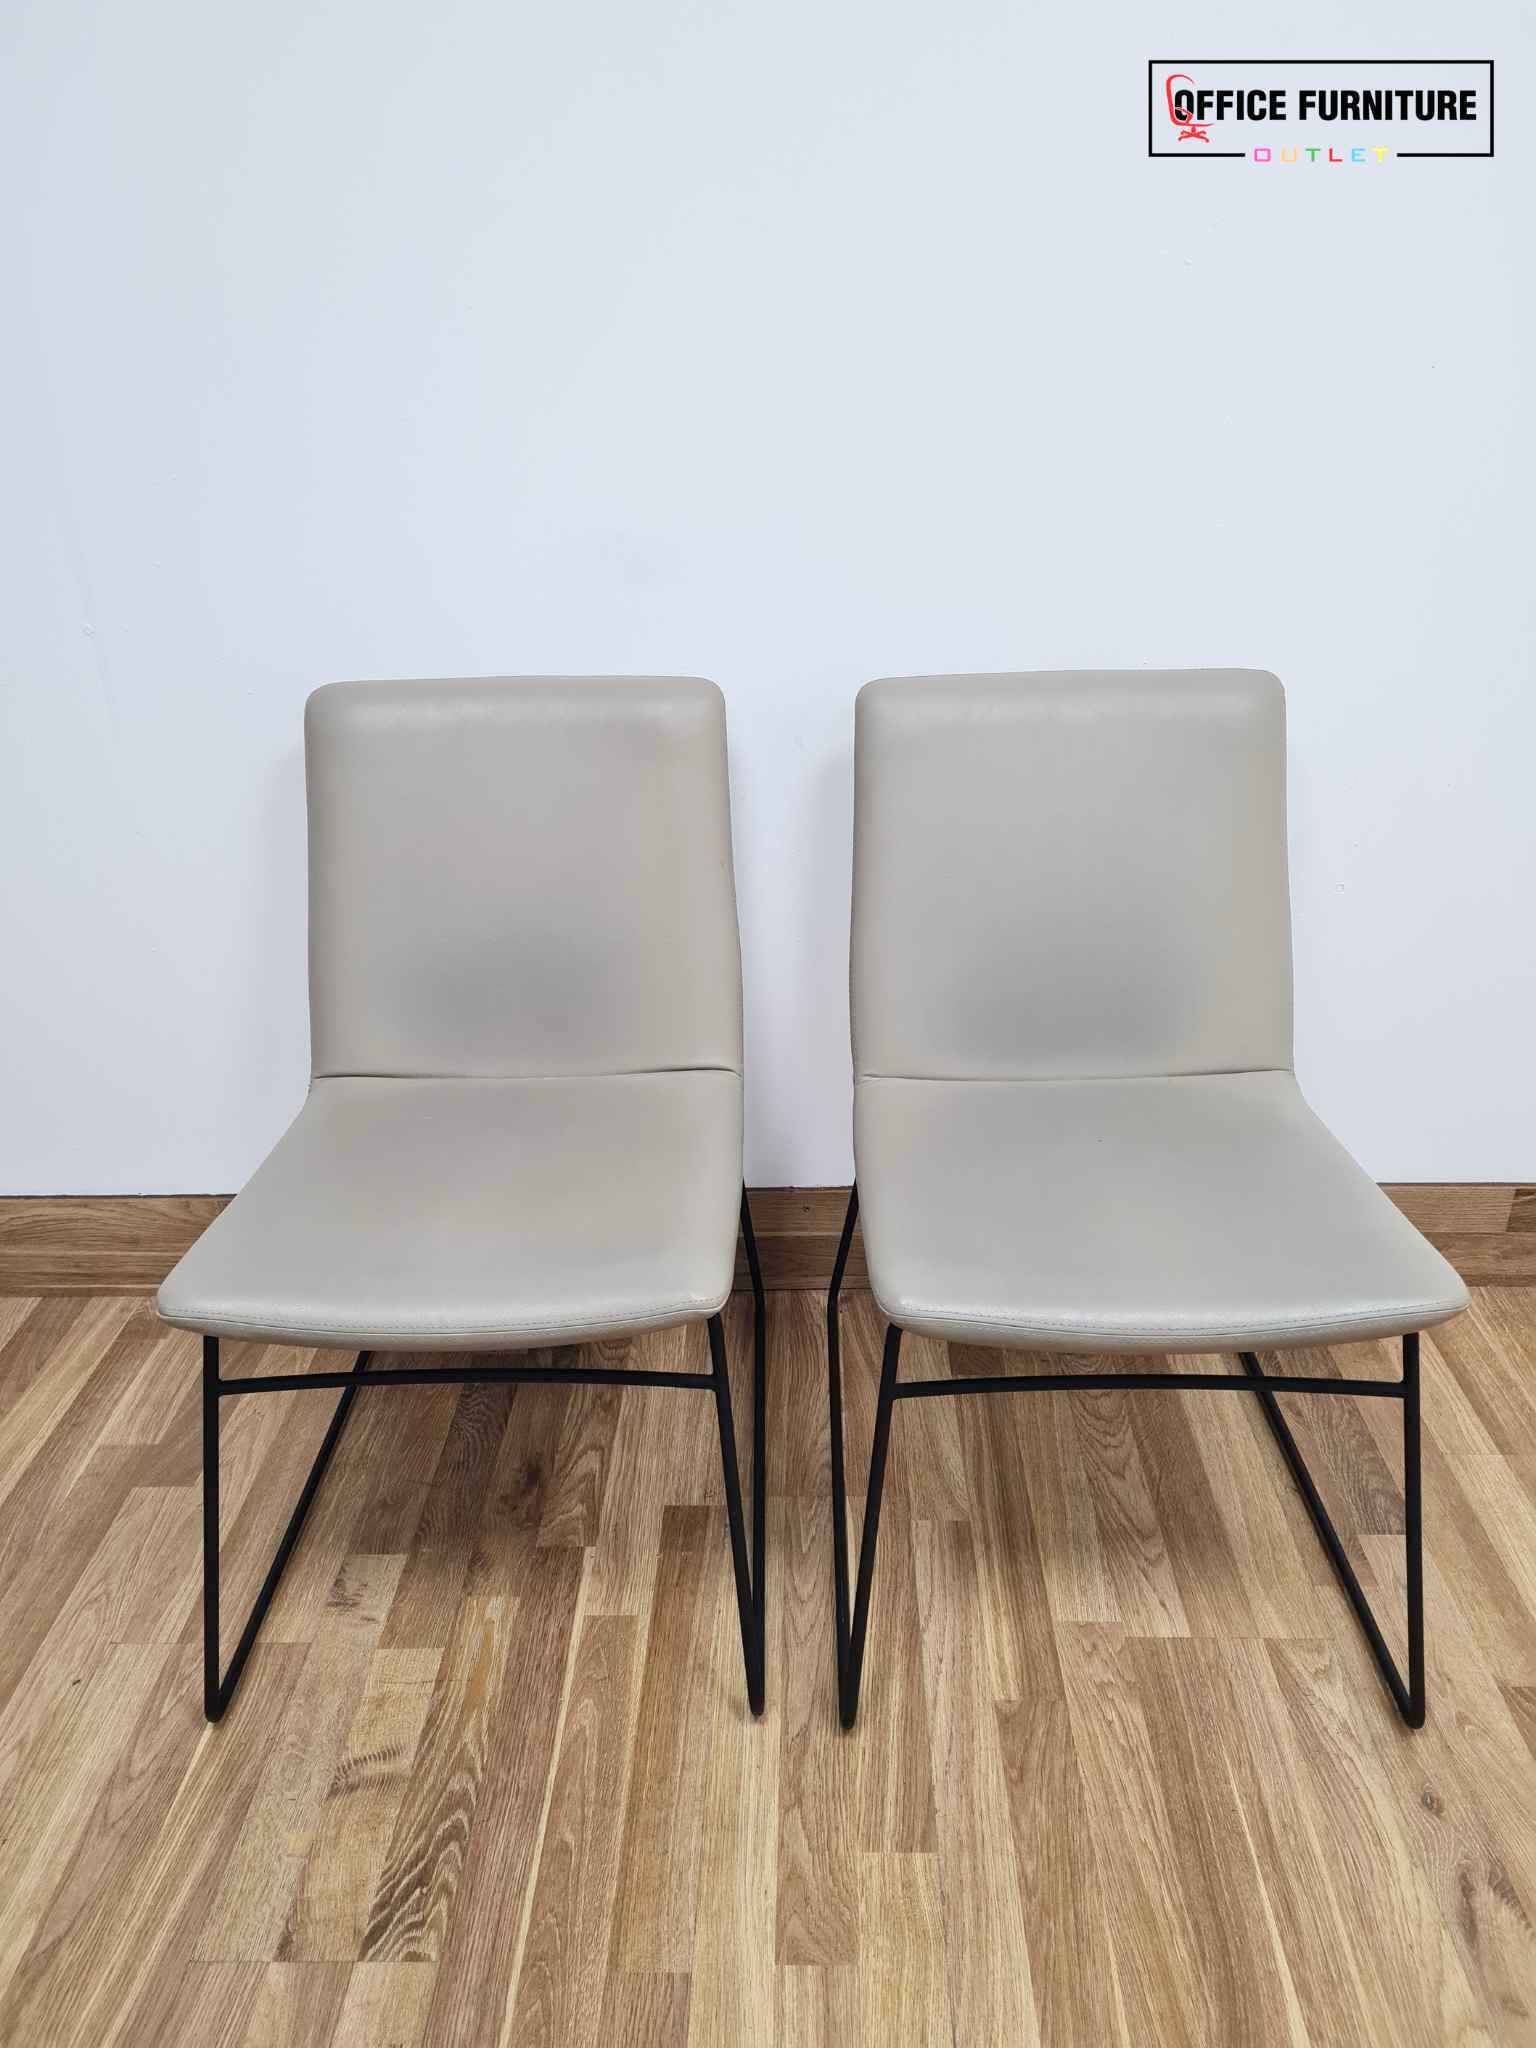 Pair Of Cream Faux Leather Visitor Chairs